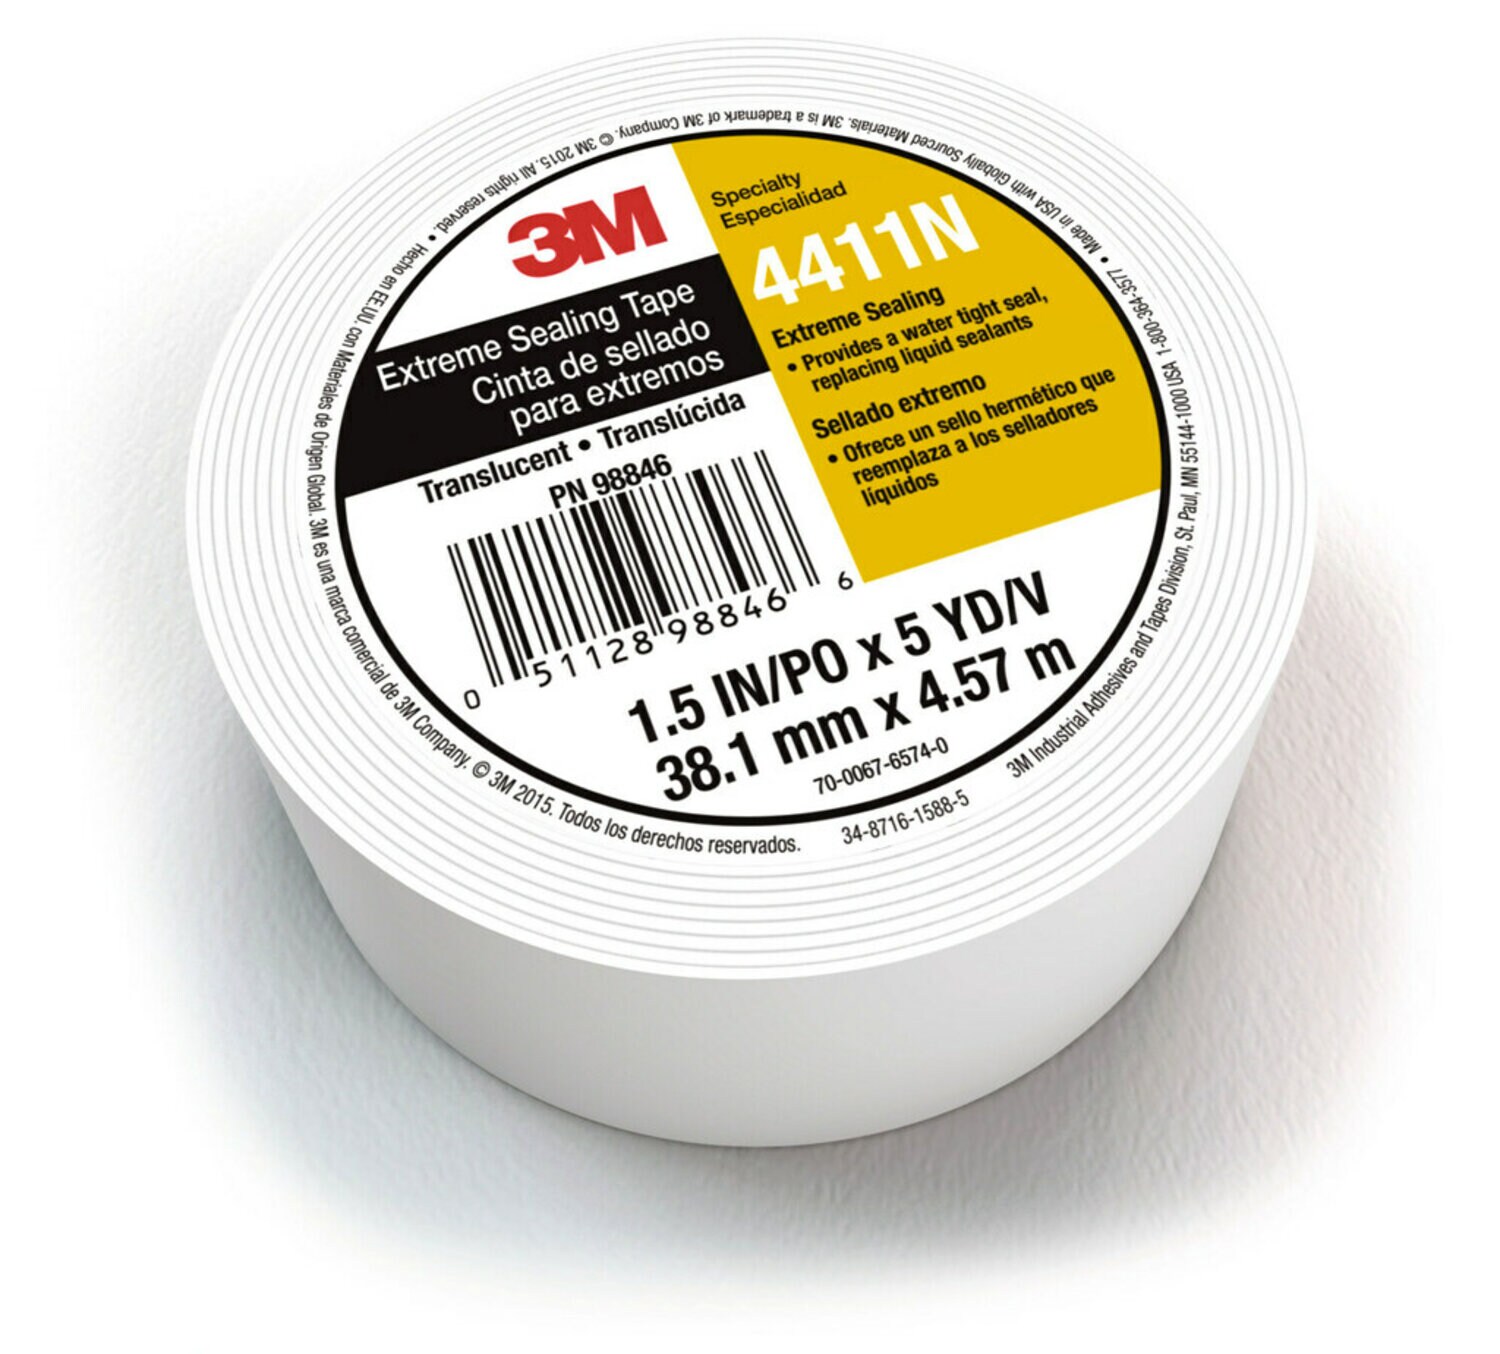 7000049661 - 3M Extreme Sealing Tape 4411N, Translucent, 2 in x 36 yd, 40 mil, 6
rolls per case